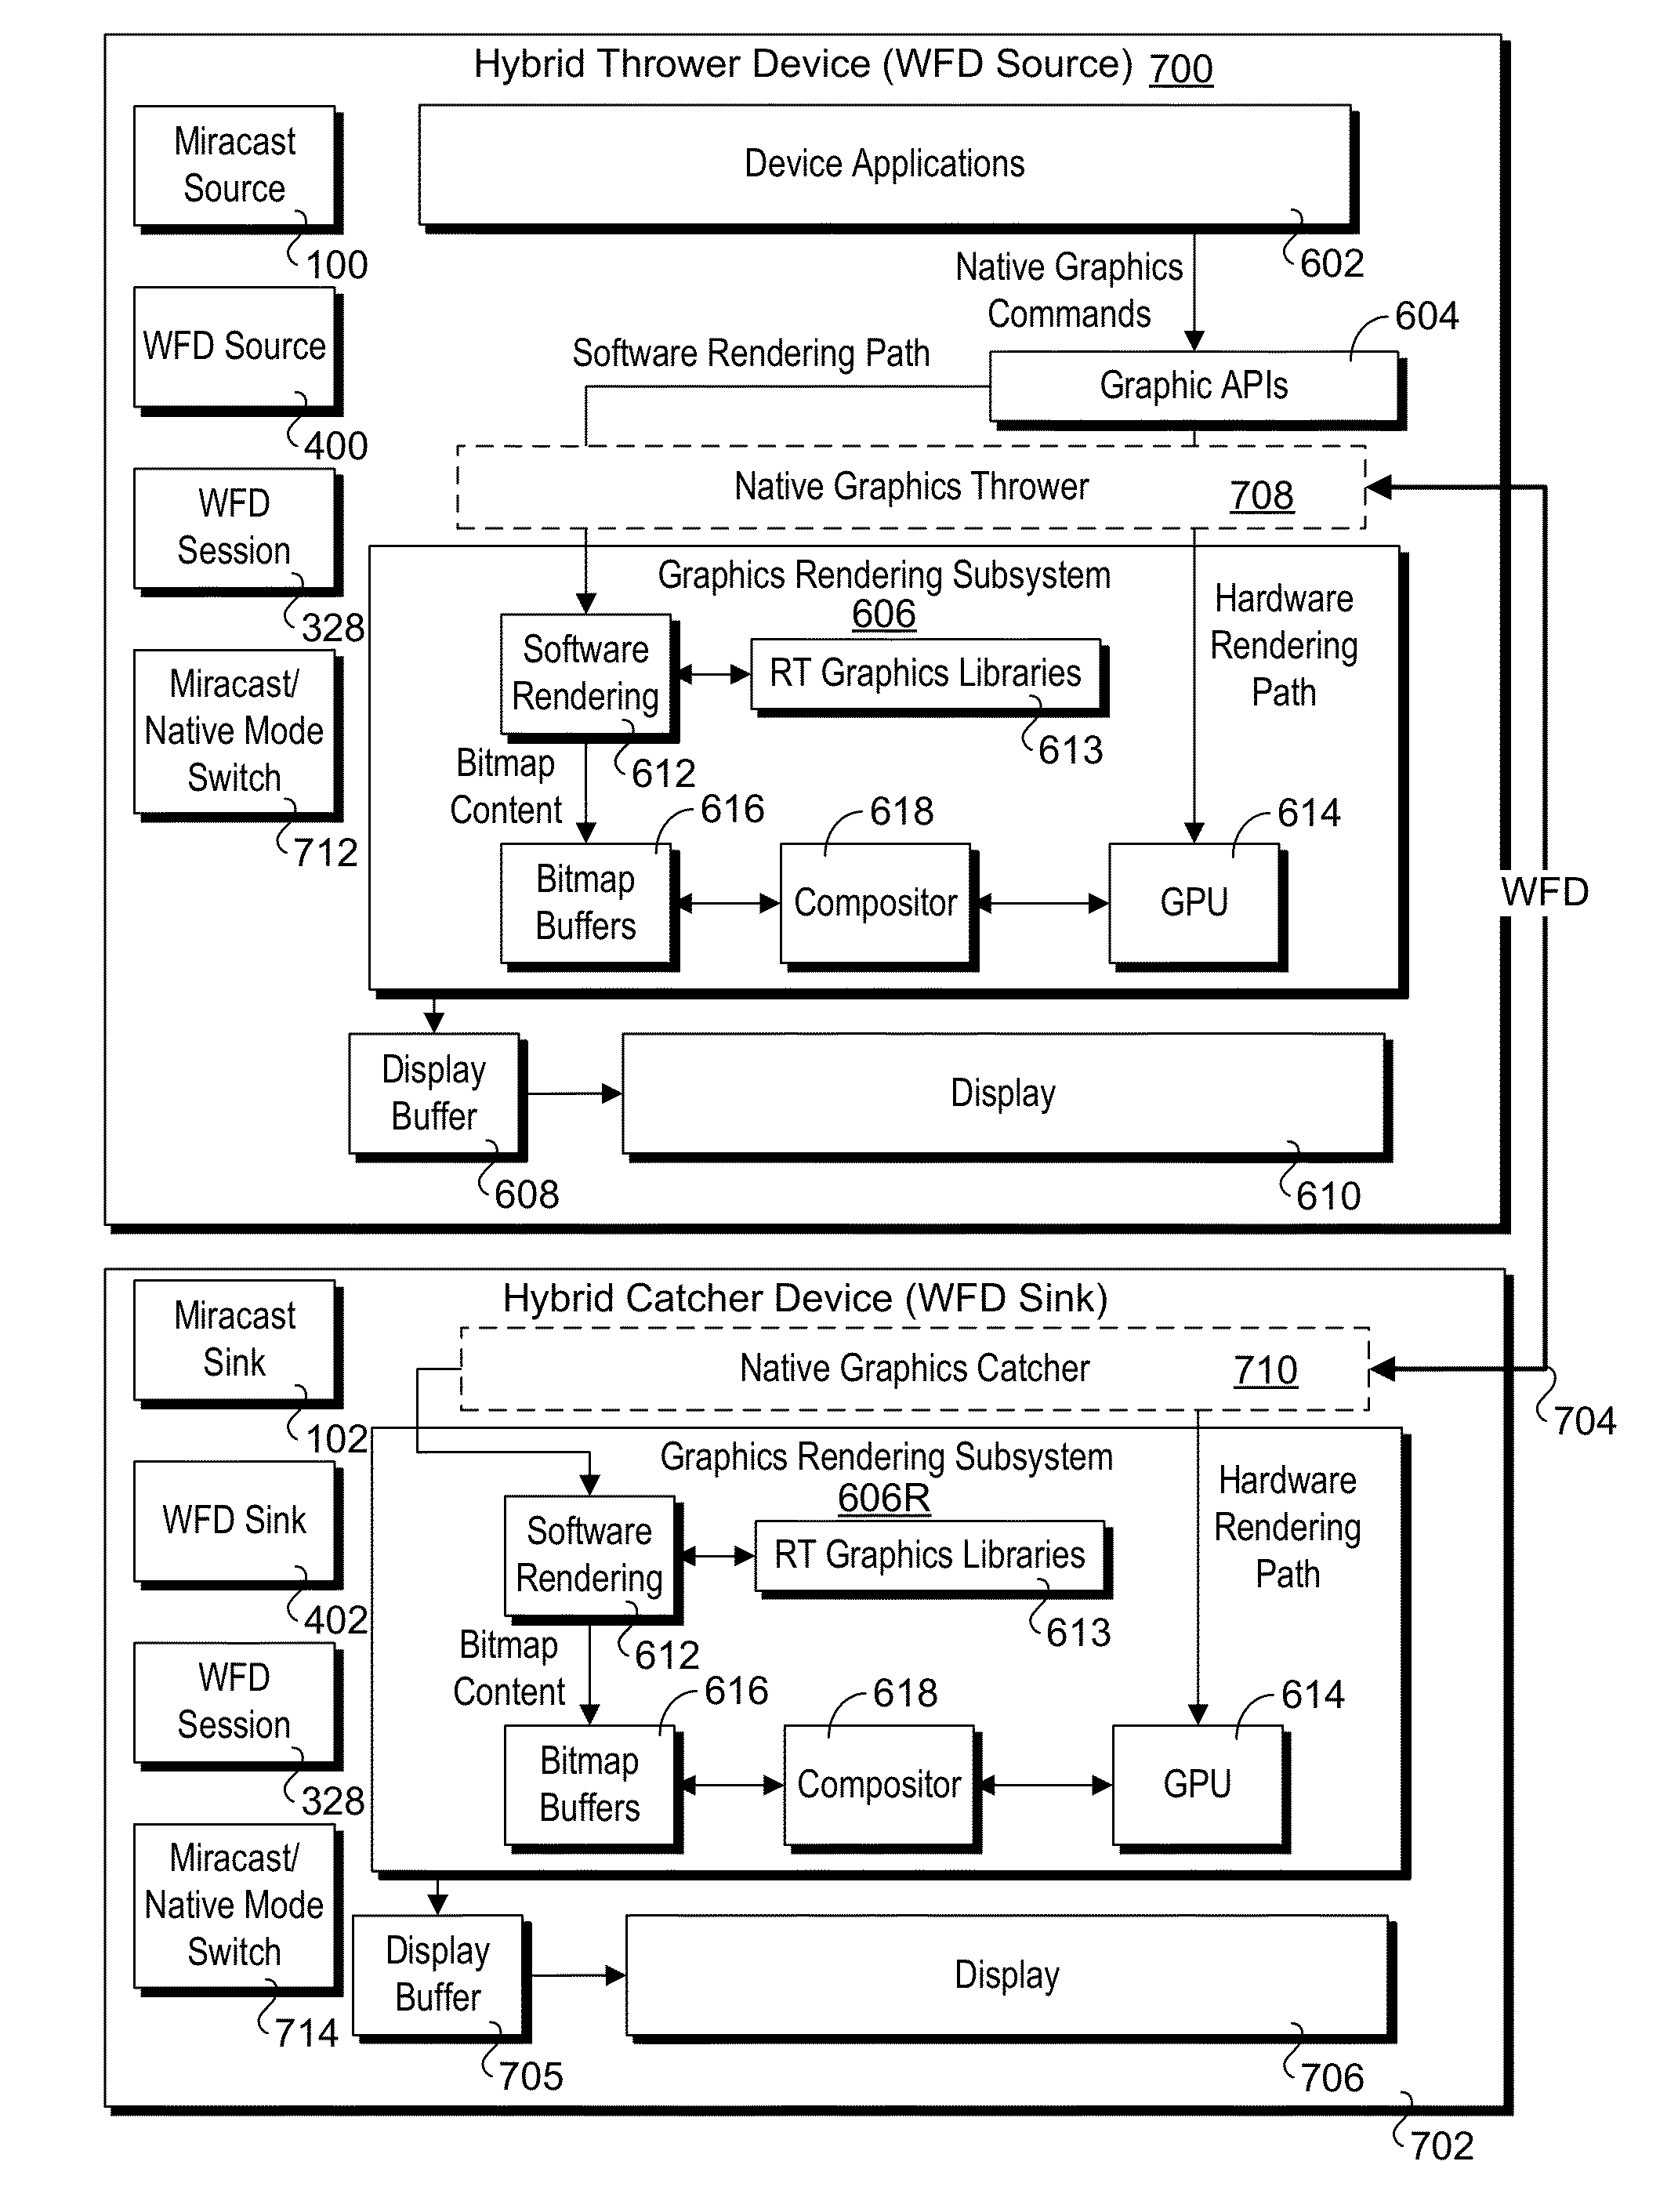 Mode-switch protocol and mechanism for hybrid wireless display system with screencasting and native graphics throwing